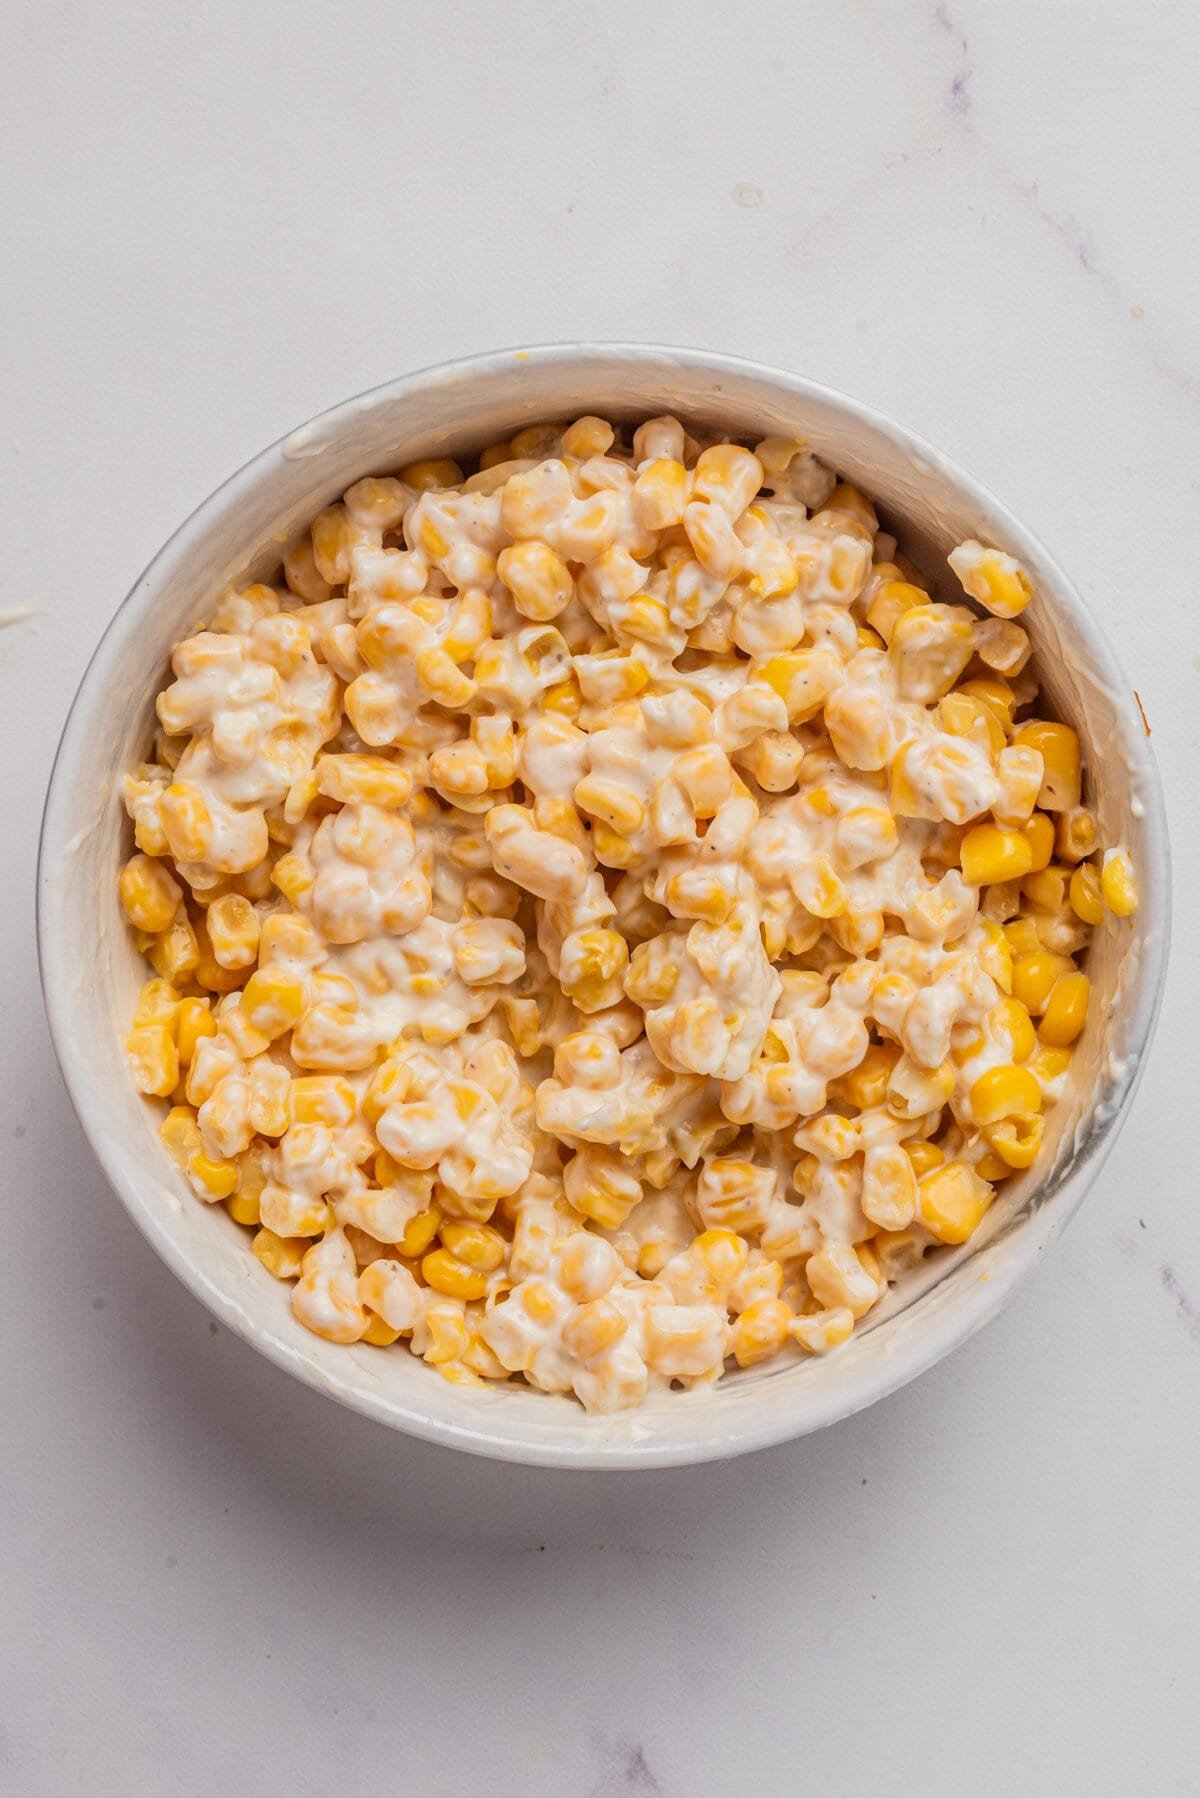 An overhead image of the corn kernels mixed with the dressing.